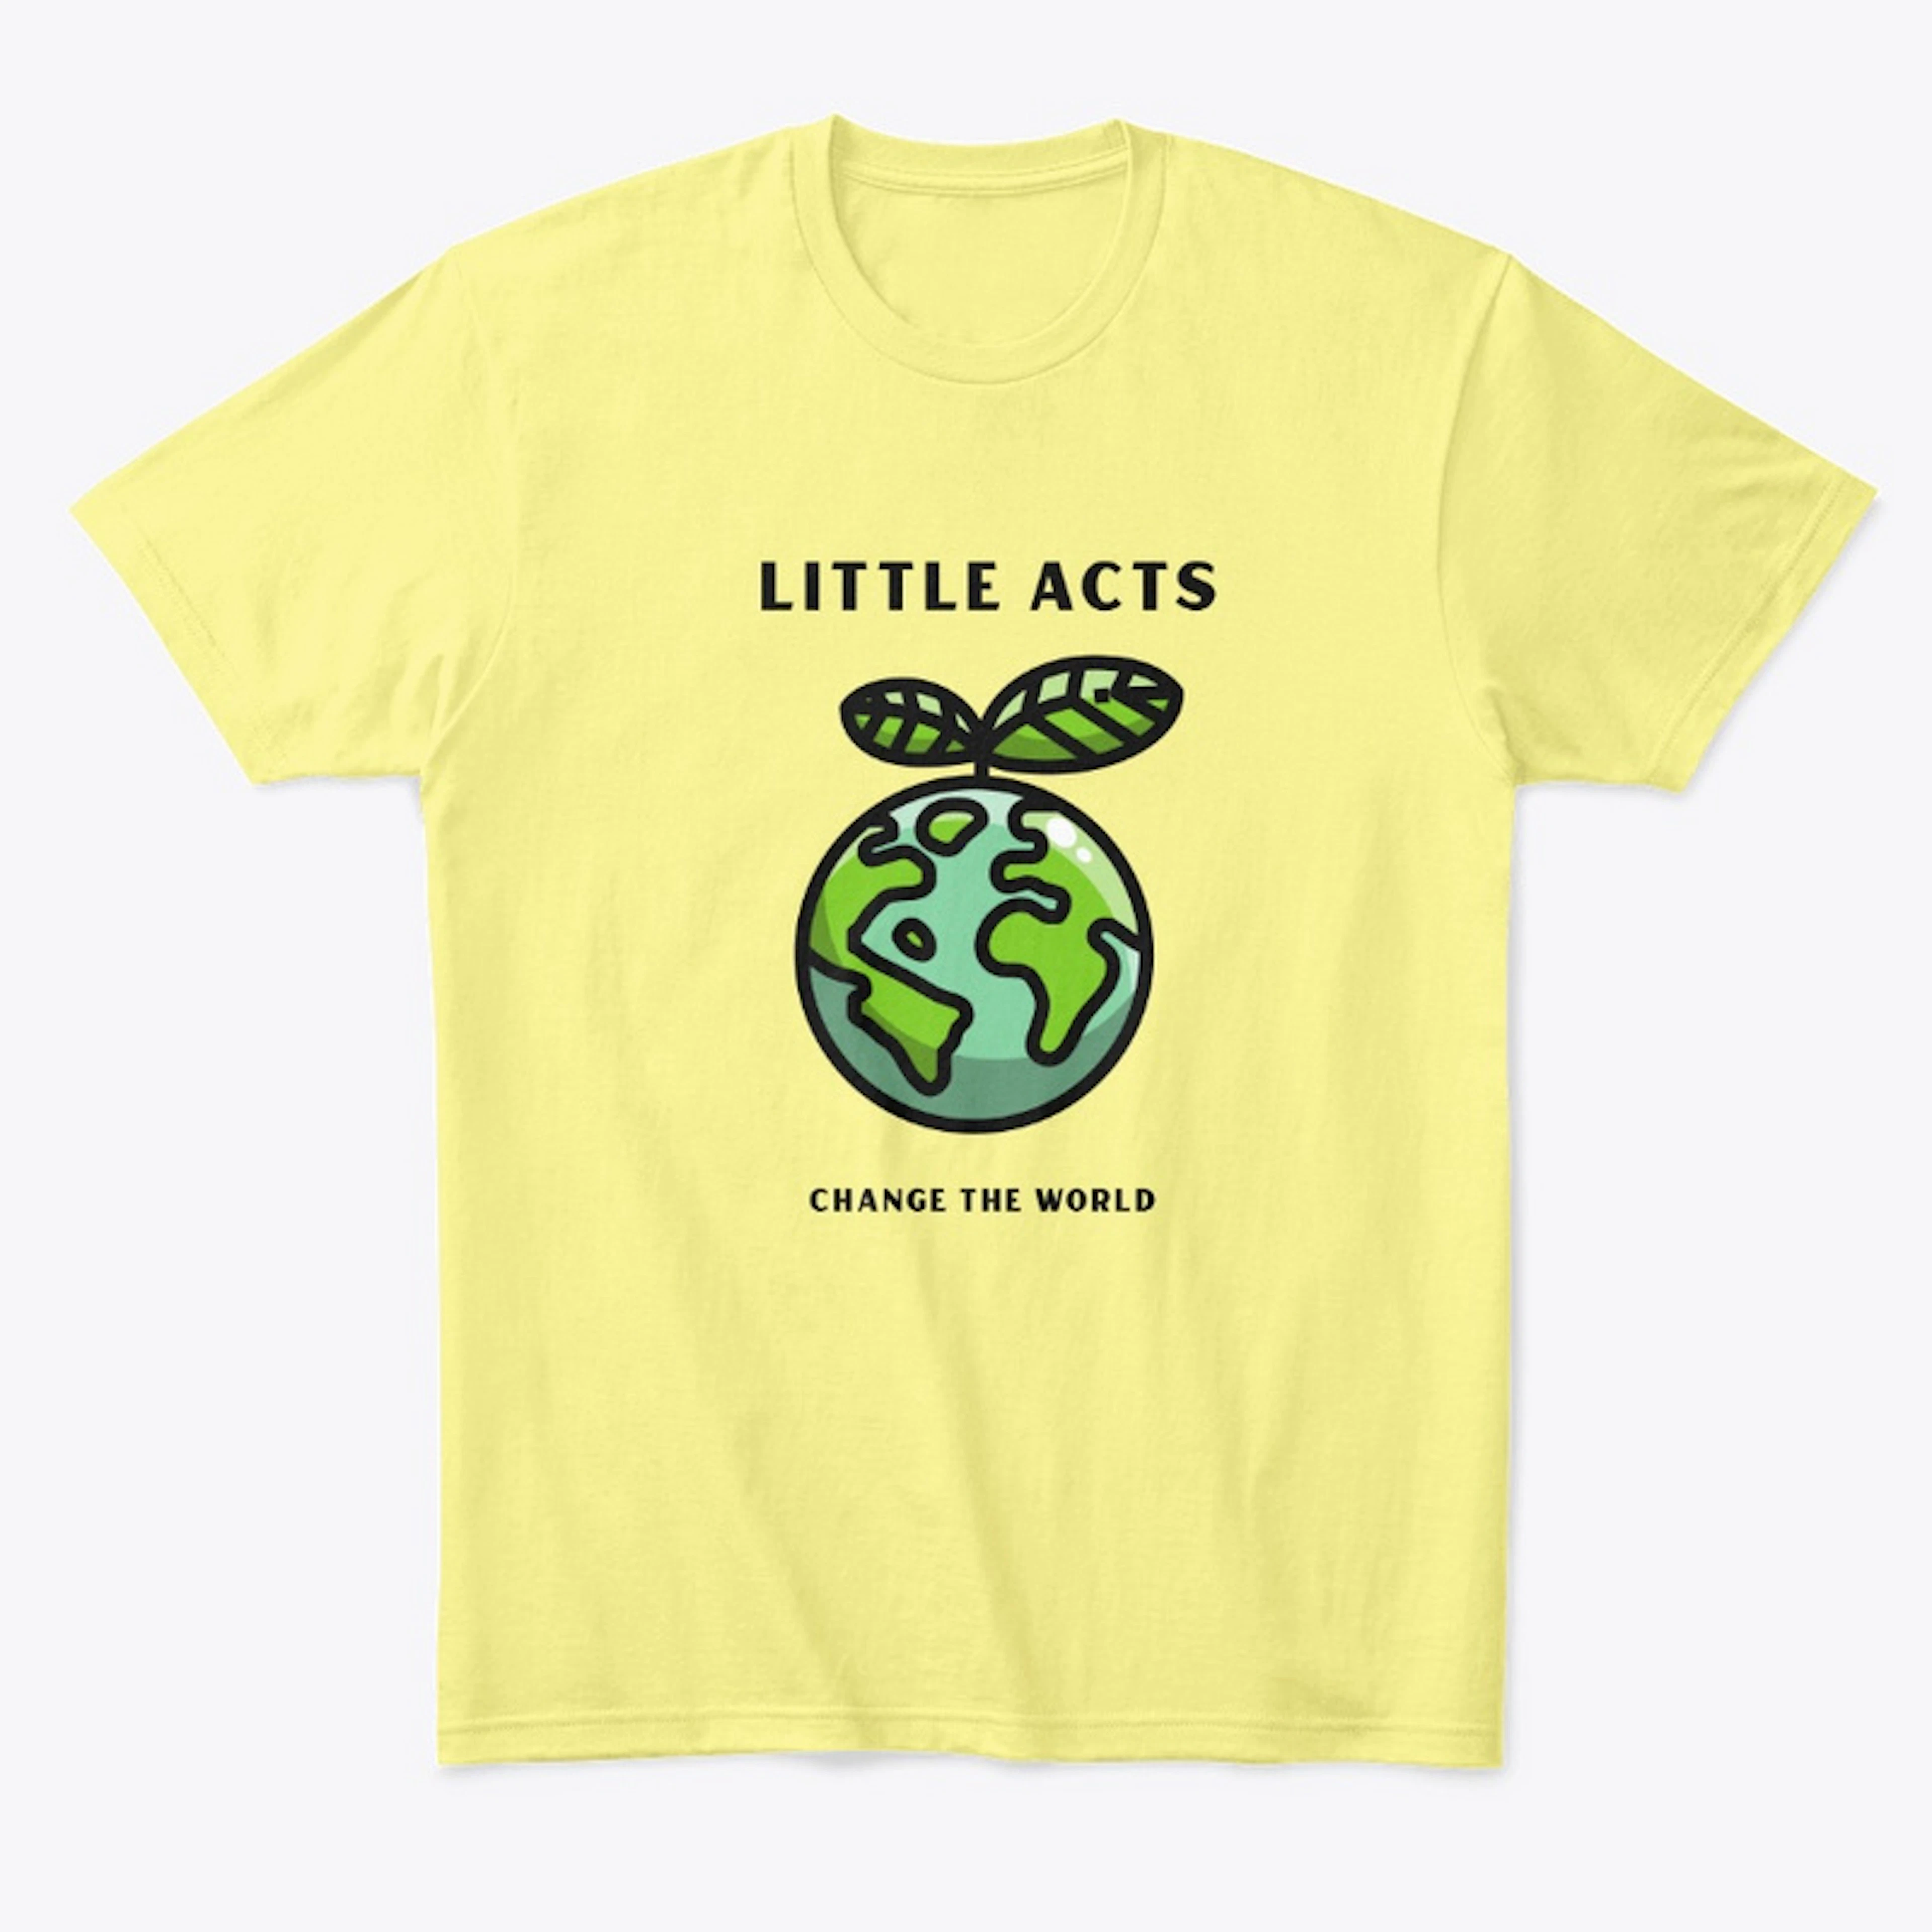 Little Acts Change the World